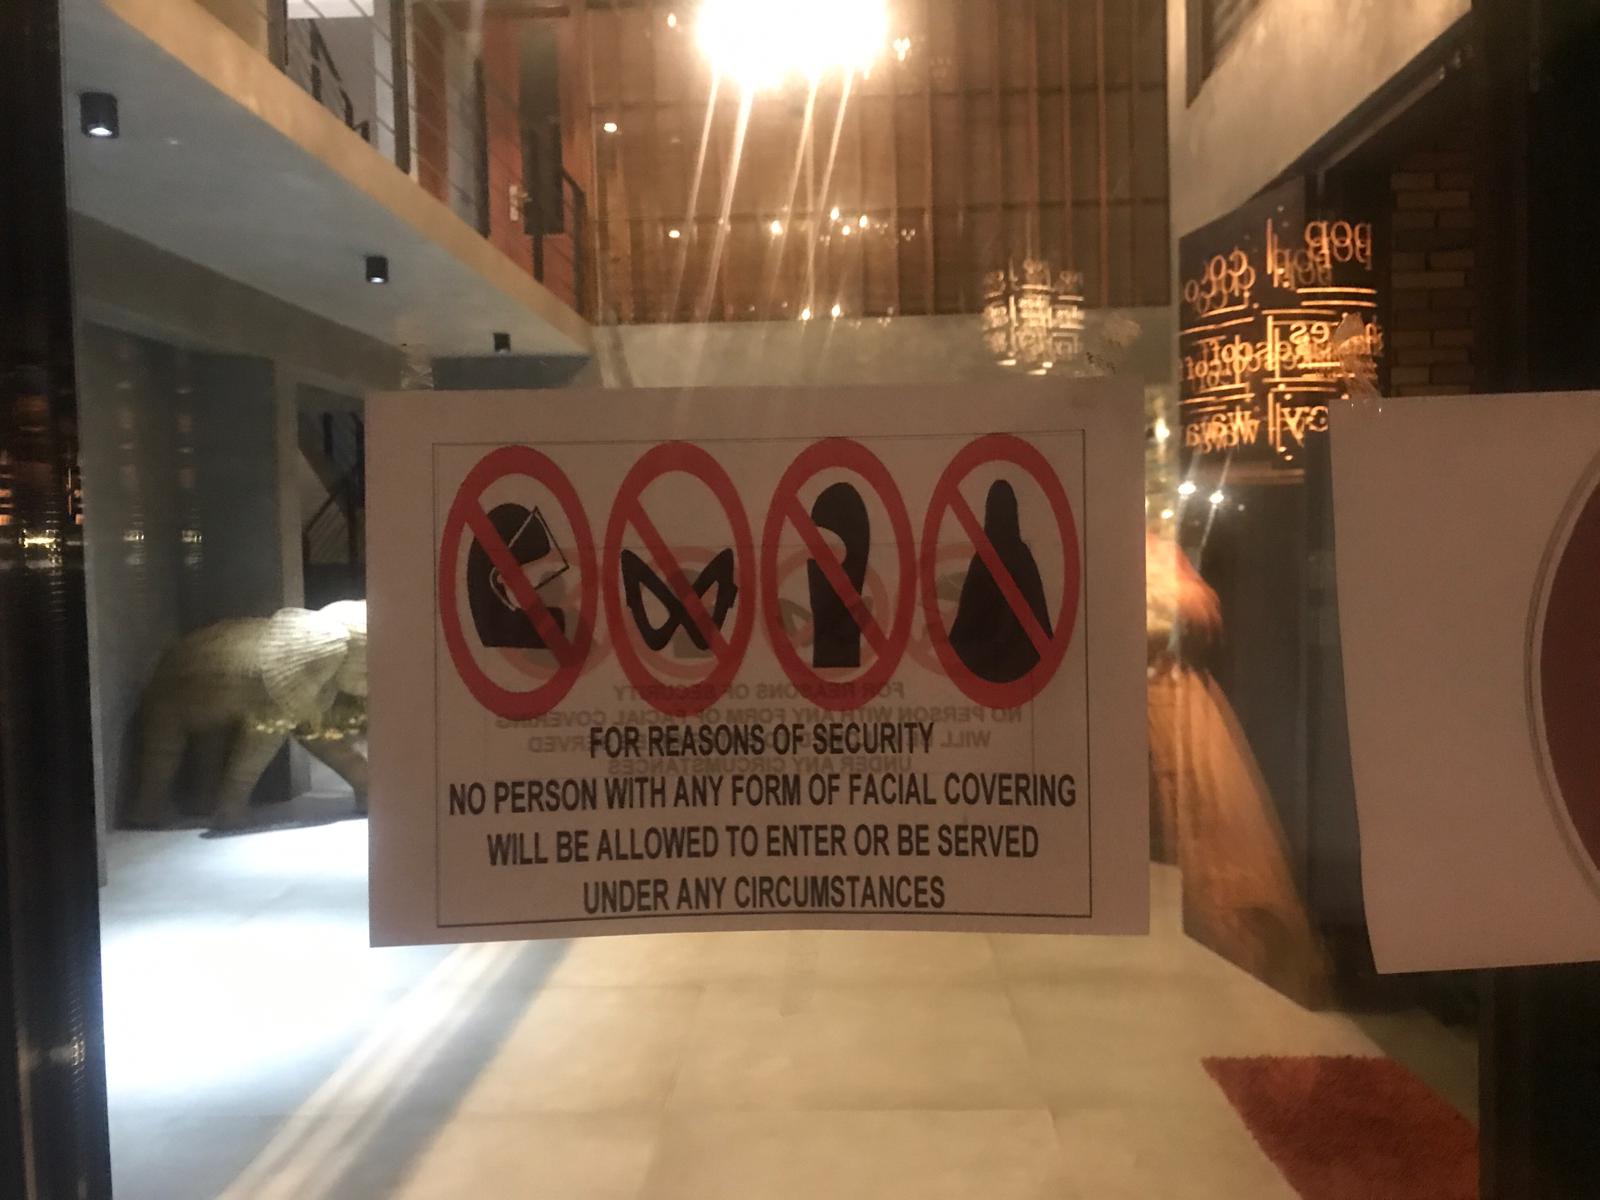 Signs at the Ella Flower Garden Resort banning people with face coverings from entry.